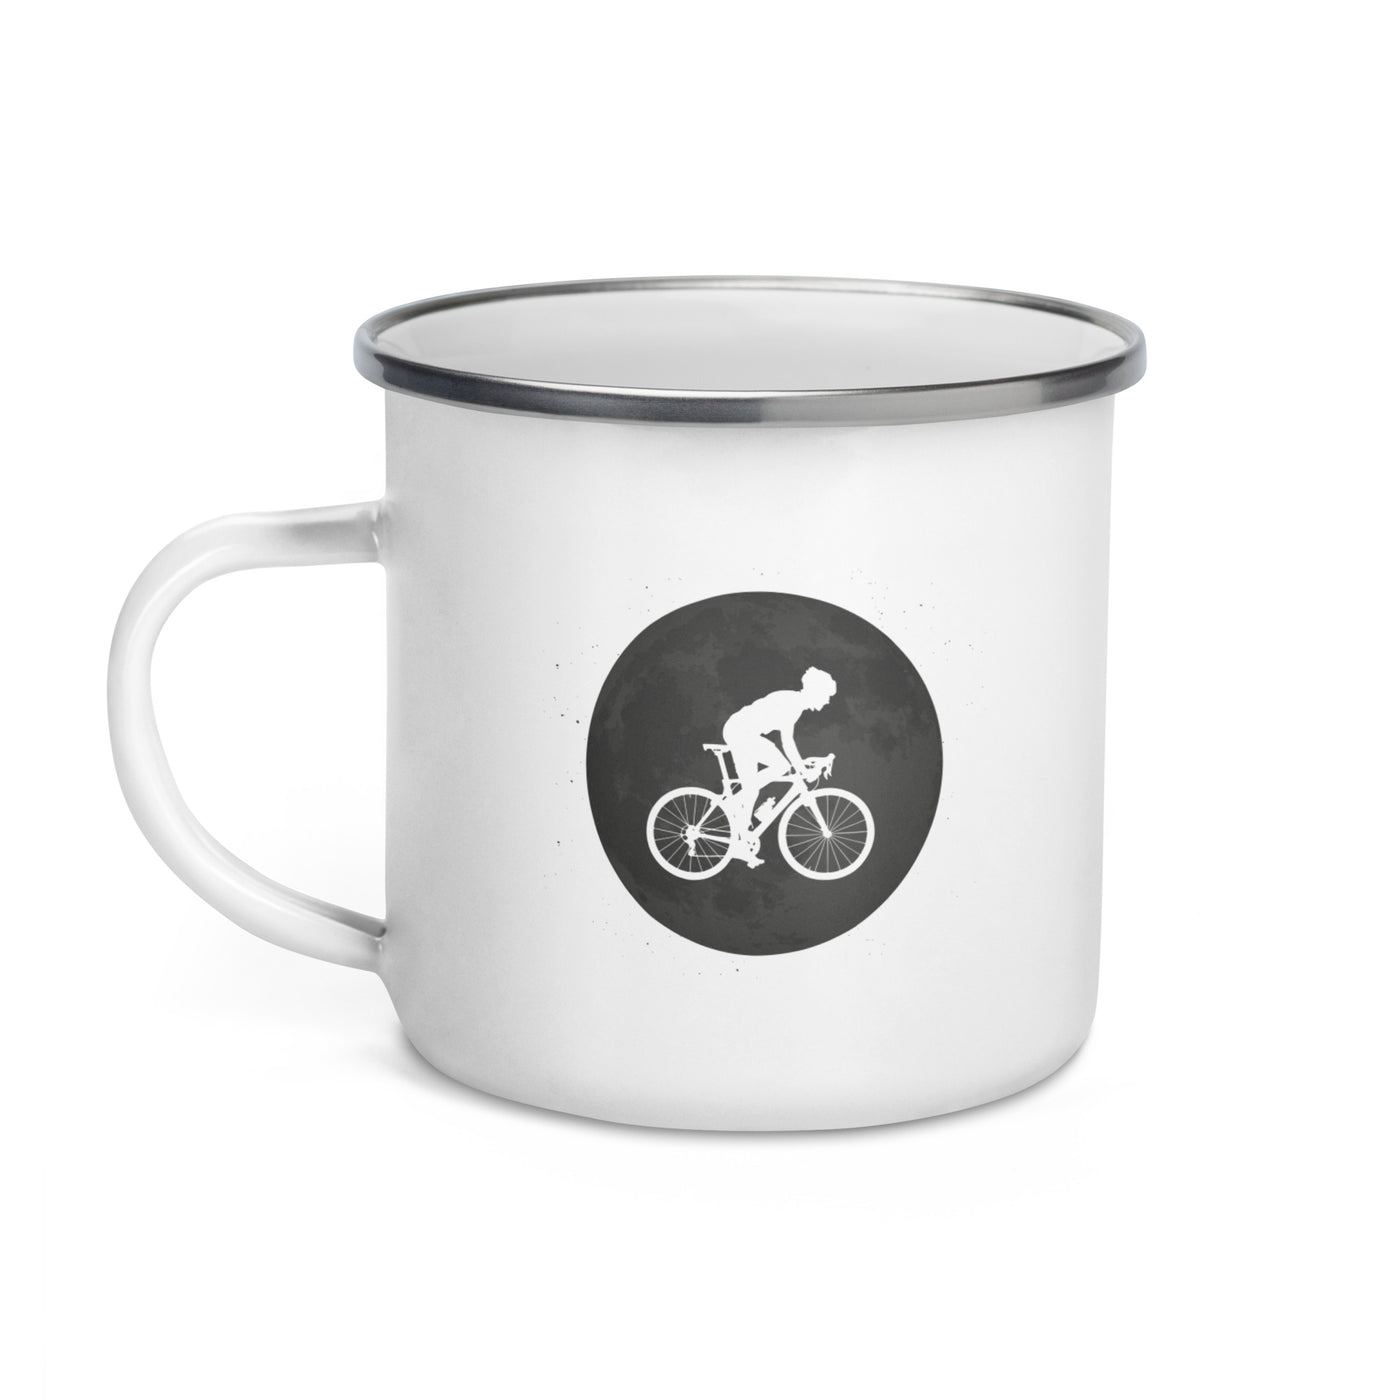 Full Moon - Man Cycling - Emaille Tasse fahrrad